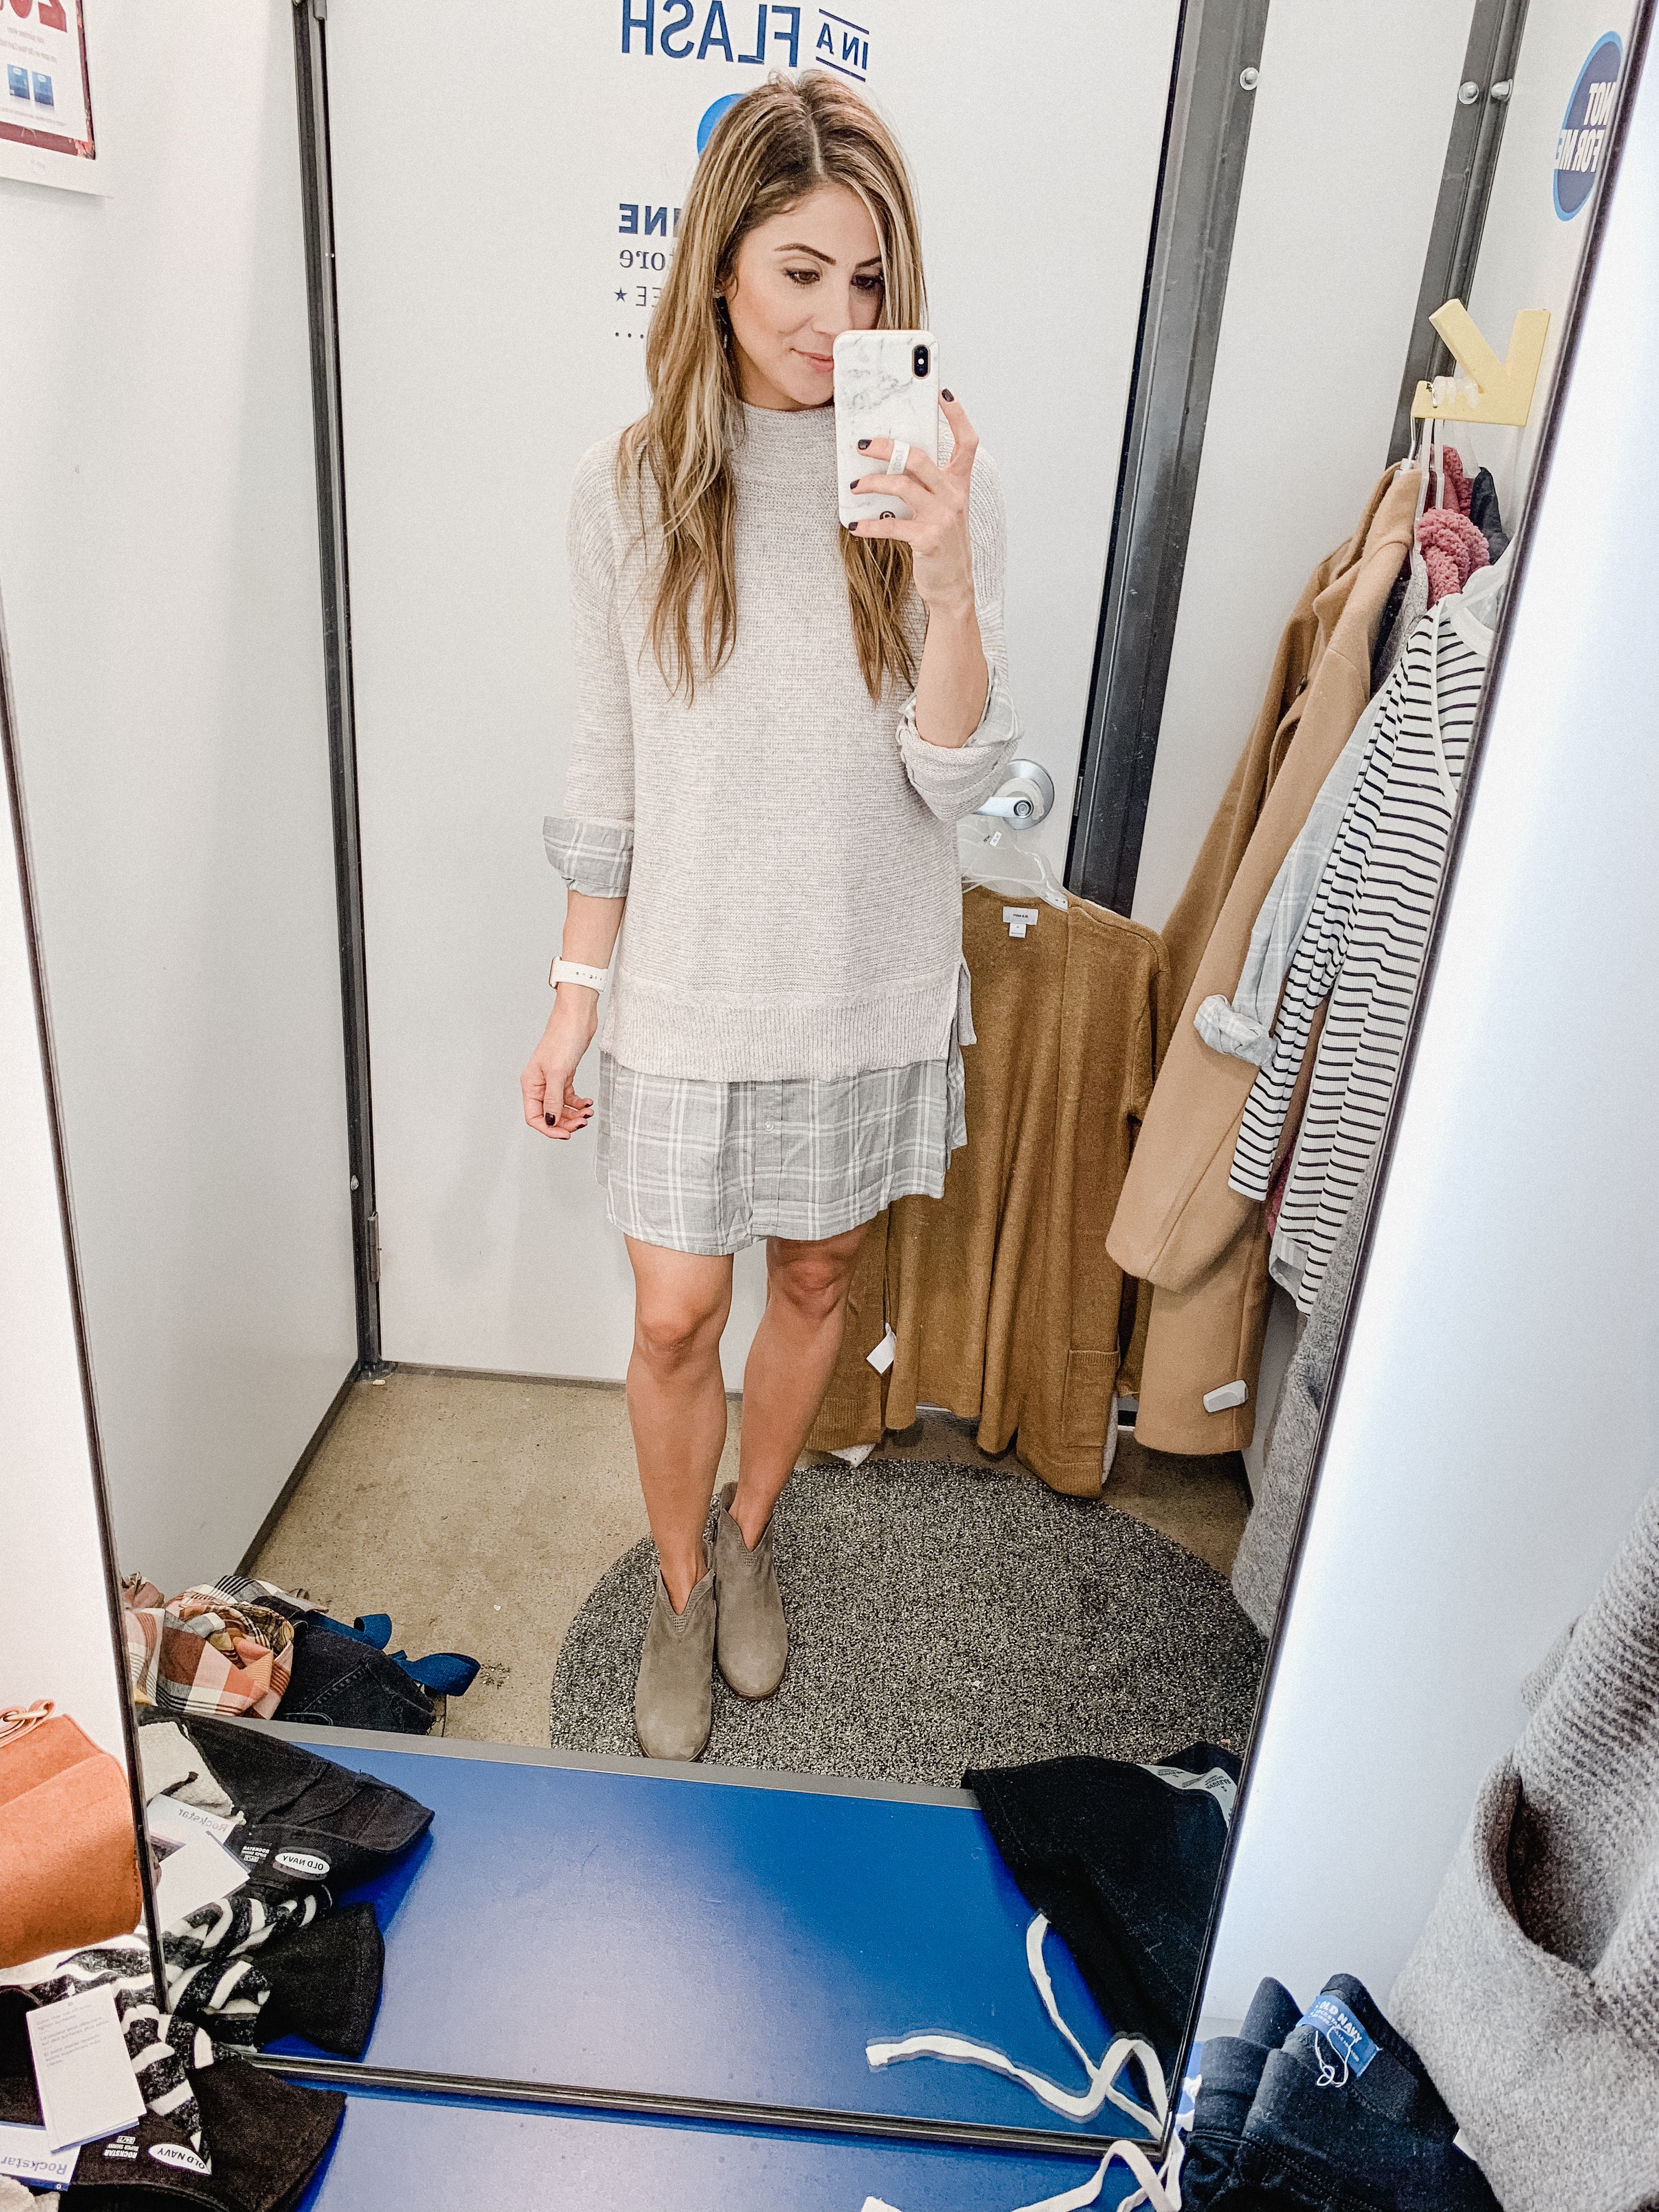 Connecticut life and style blogger Lauren McBride shares a fall Old Navy try-on session featuring a capsule wardrobe for October.